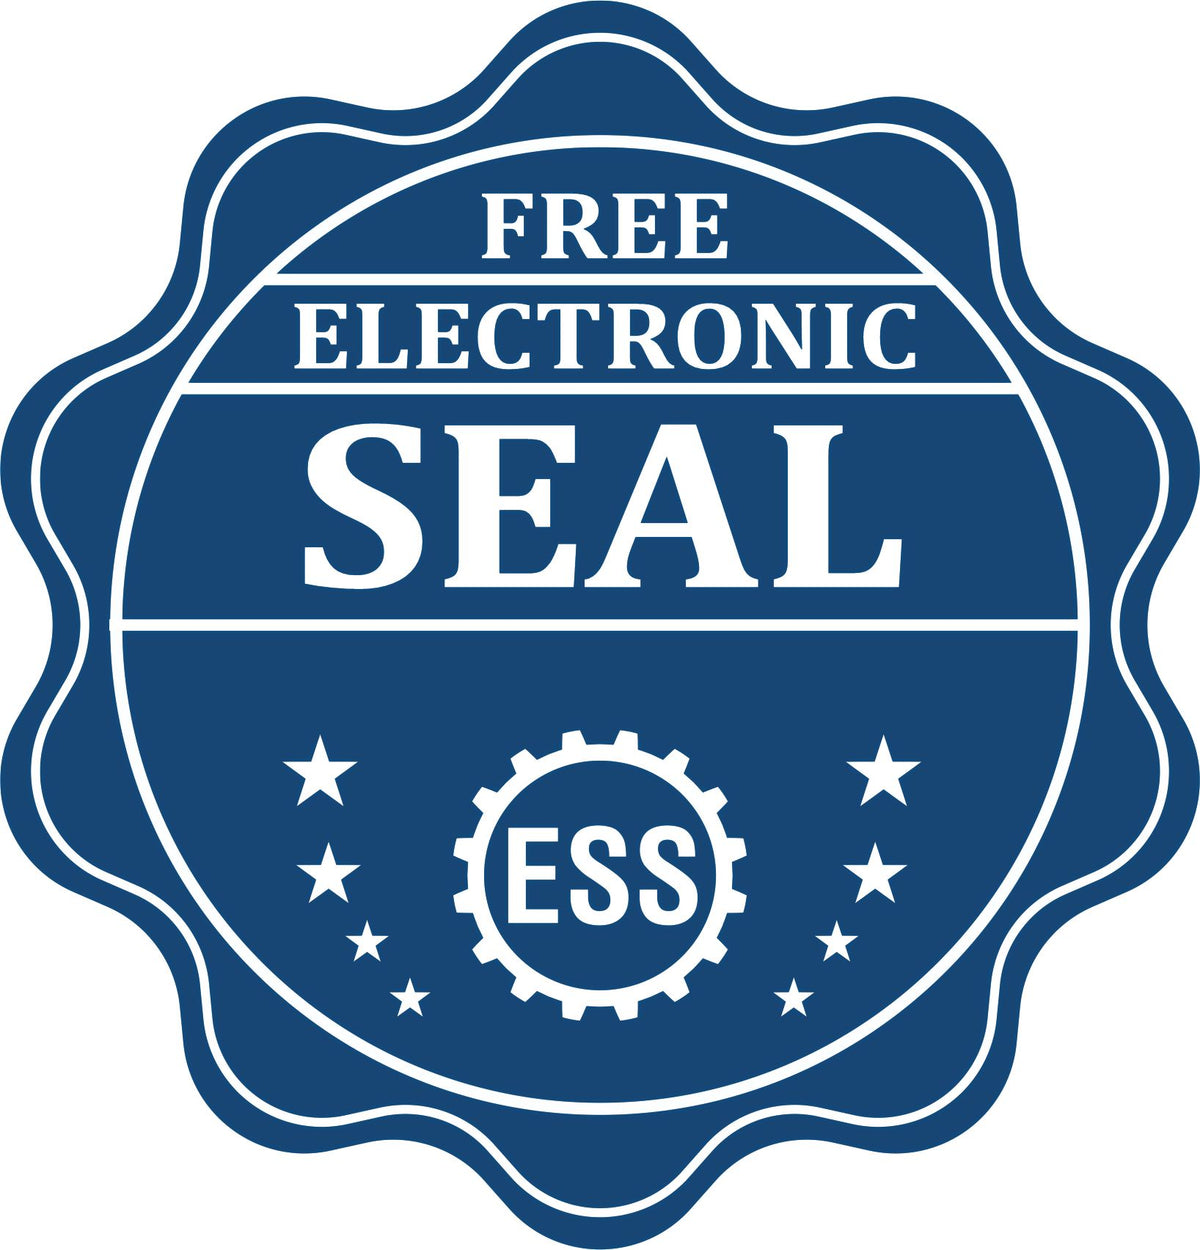 A badge showing a free electronic seal for the State of Wyoming Soft Land Surveyor Embossing Seal with stars and the ESS gear on the emblem.